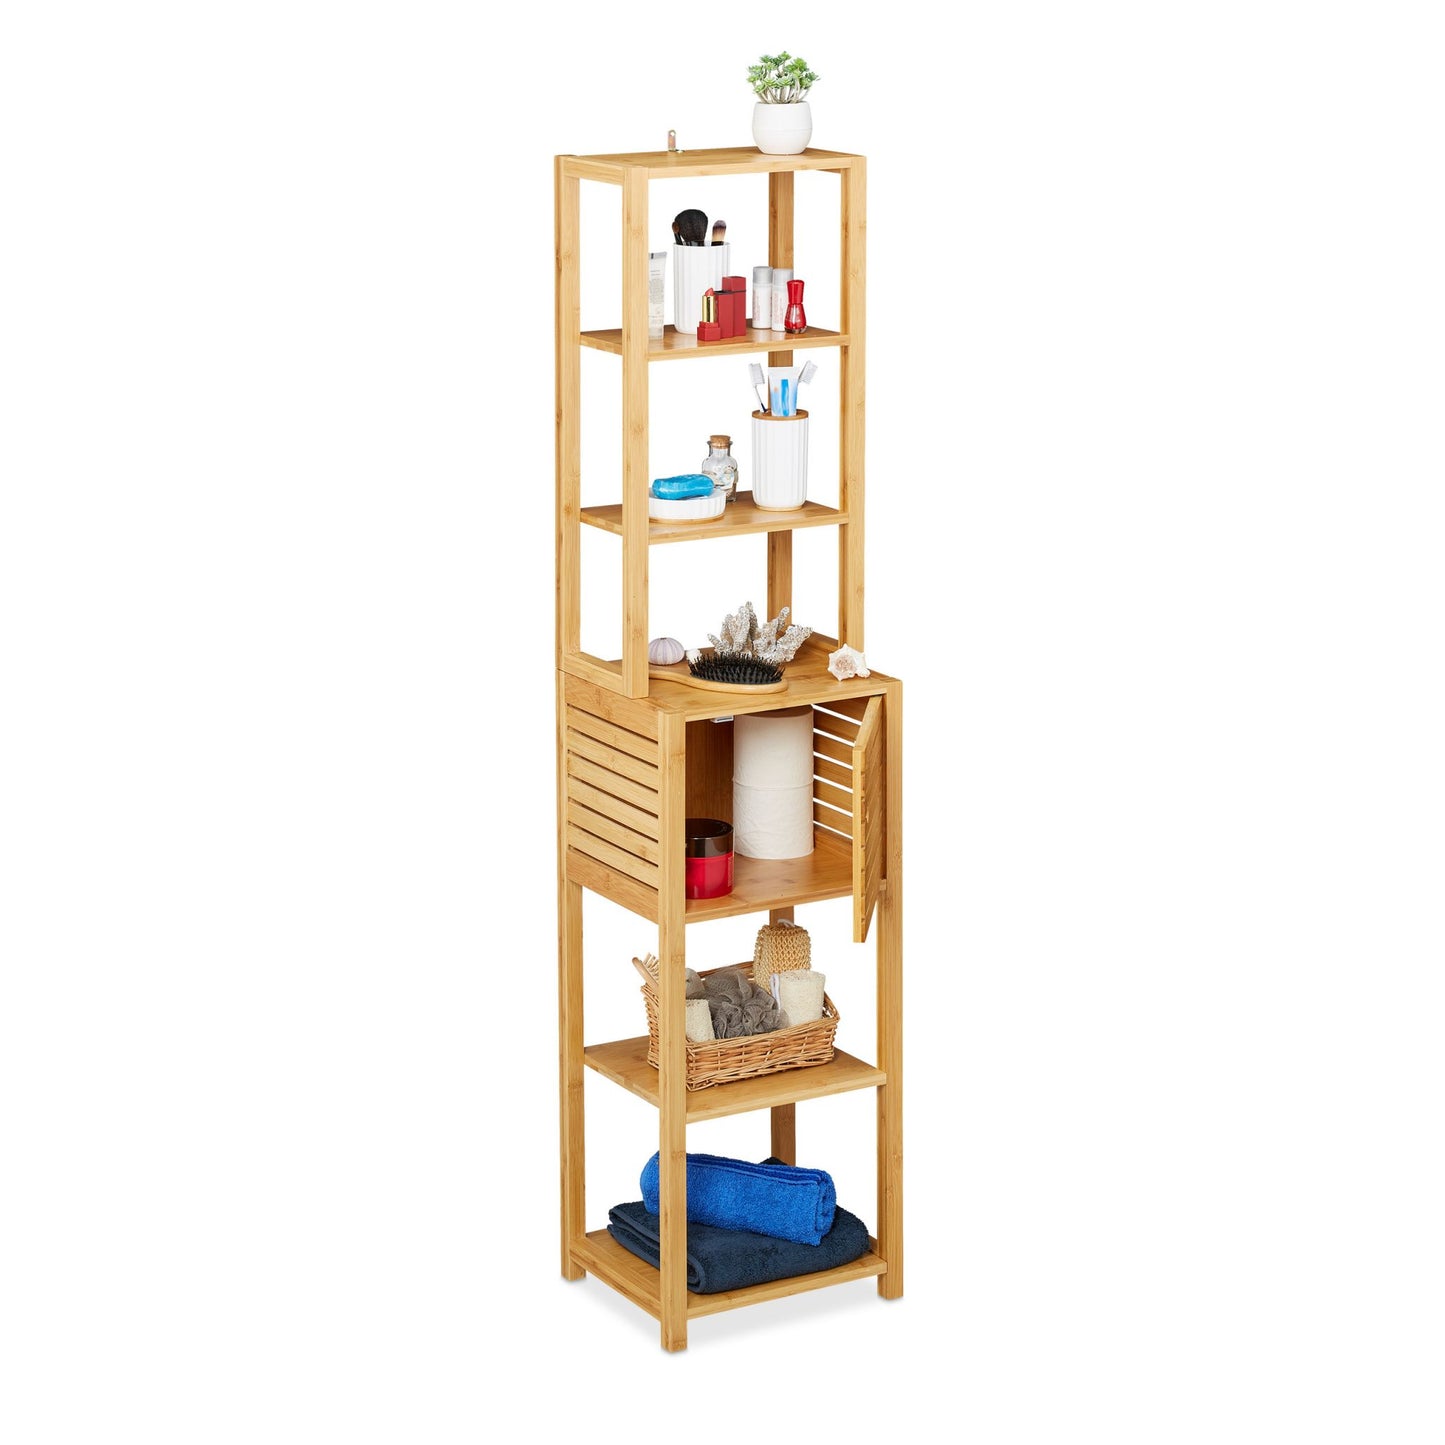 RelaxDays Bamboo Bathroom Cabinet with 7 Shelves Bamboo Bathrooms